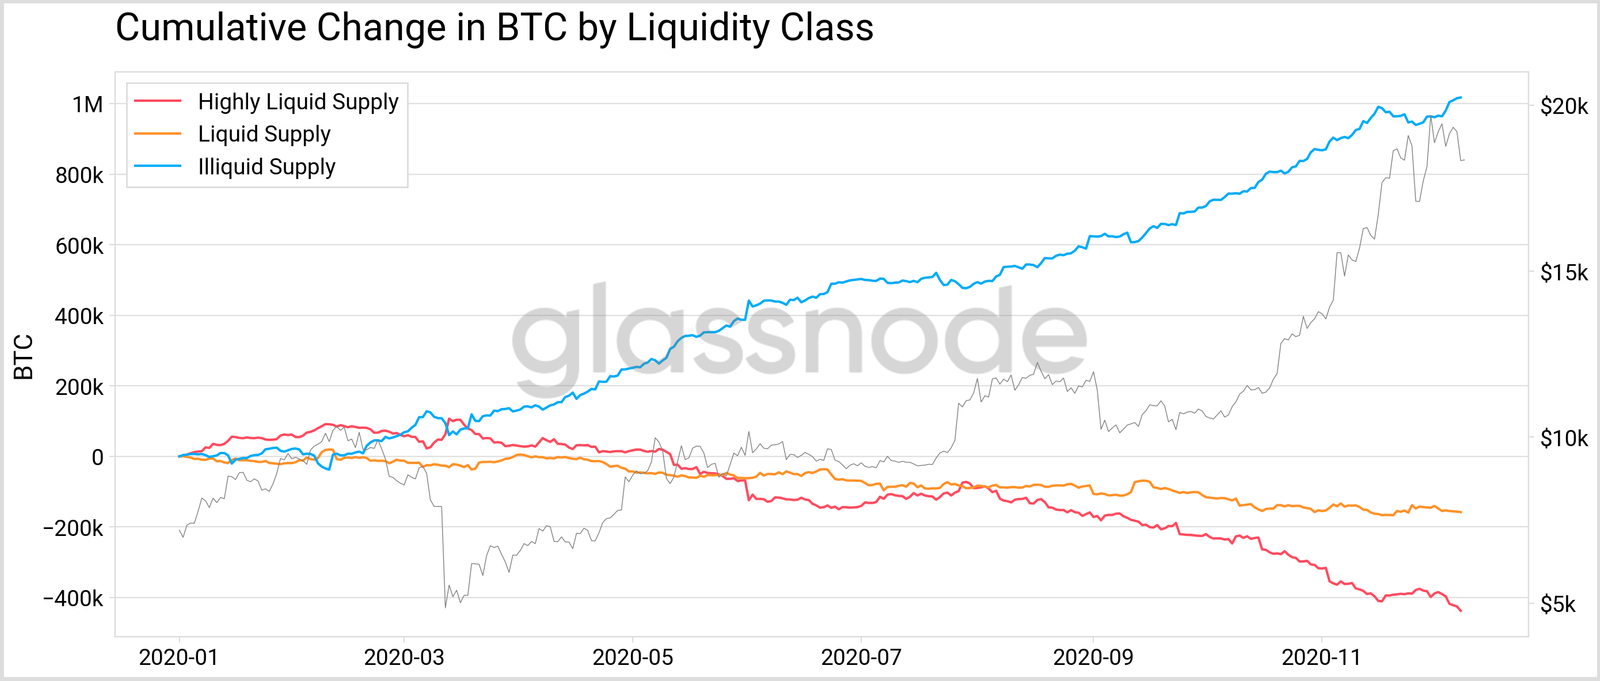  The change in BTC by liquidity class since January 202